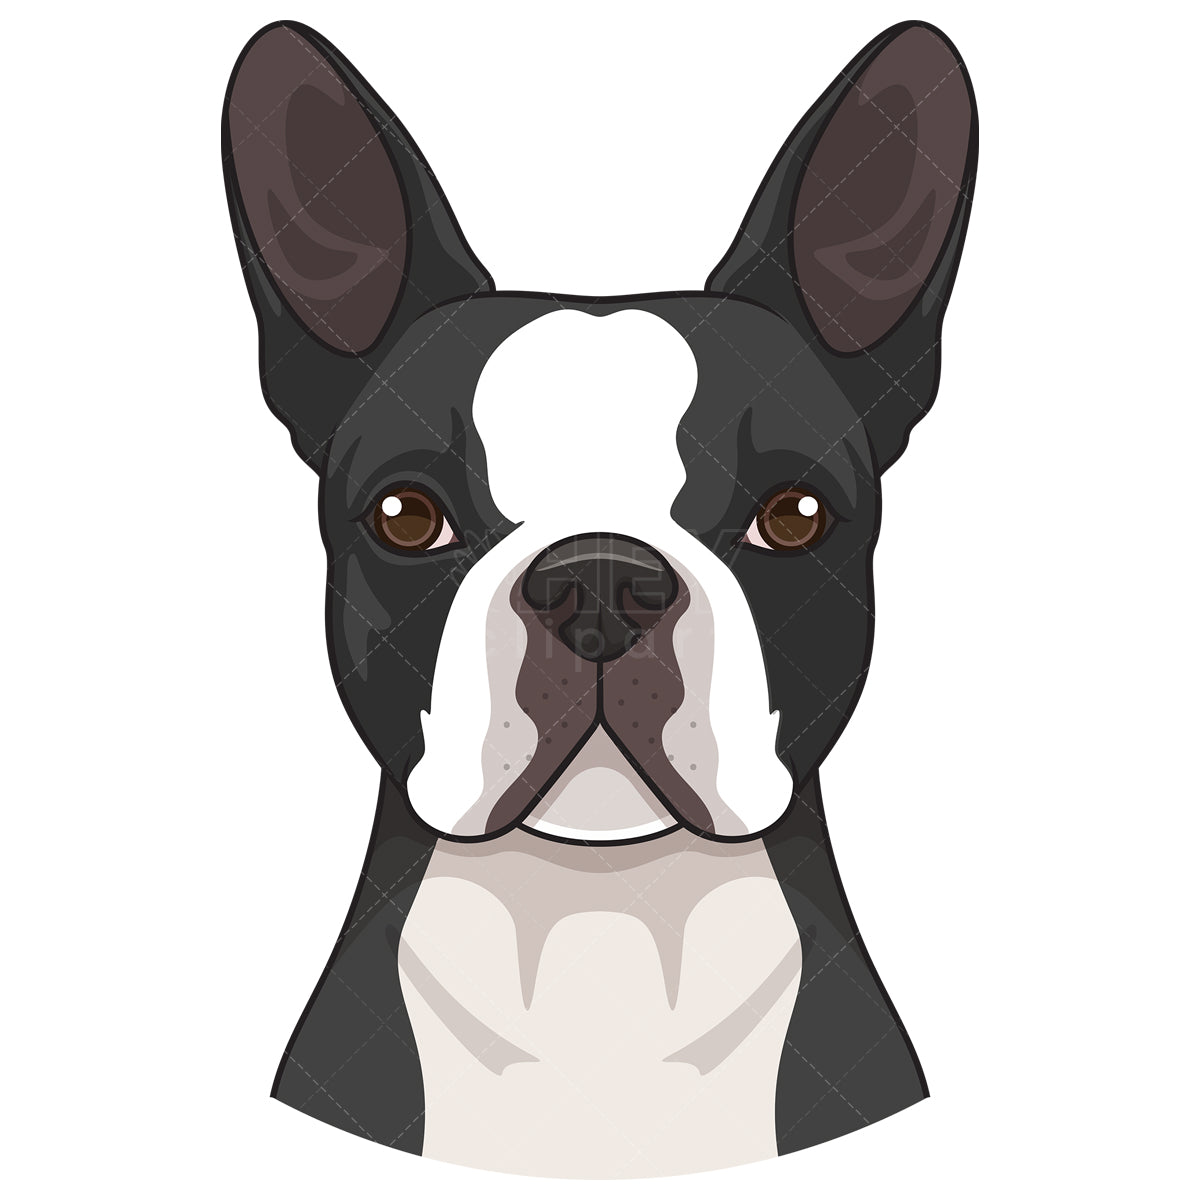 Royalty-free stock vector illustration of a boston terrier face.